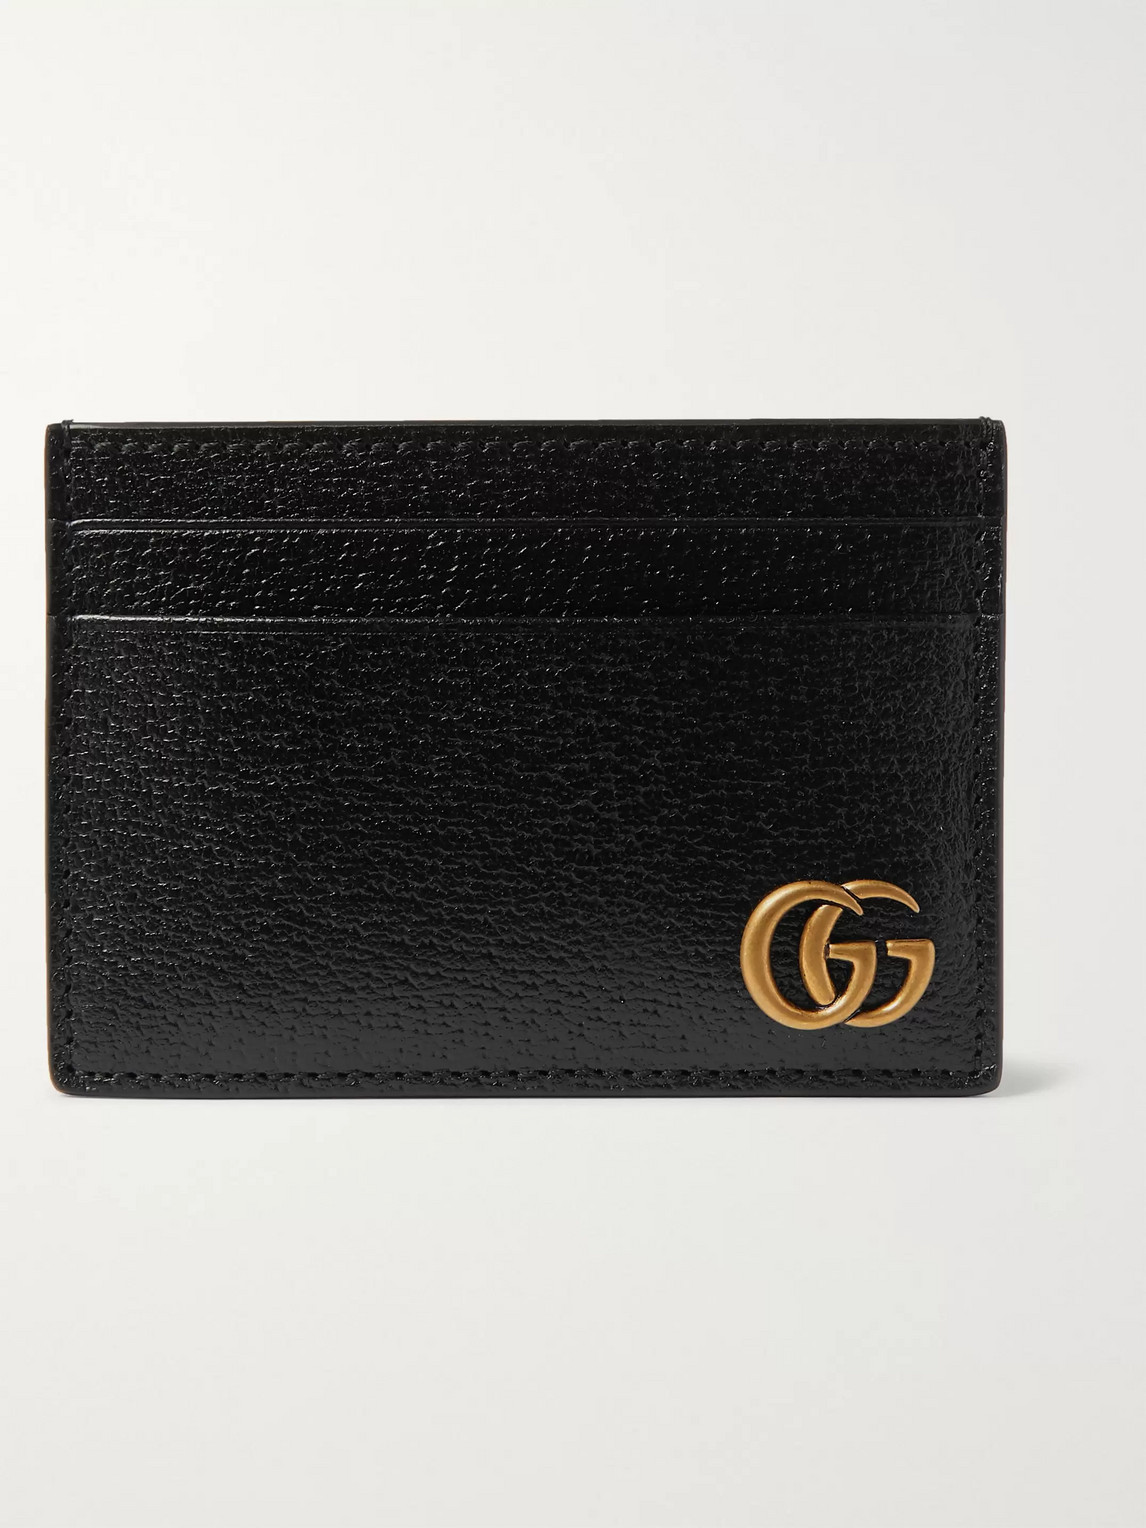 GUCCI GG MARMONT FULL-GRAIN LEATHER CARDHOLDER WITH MONEY CLIP